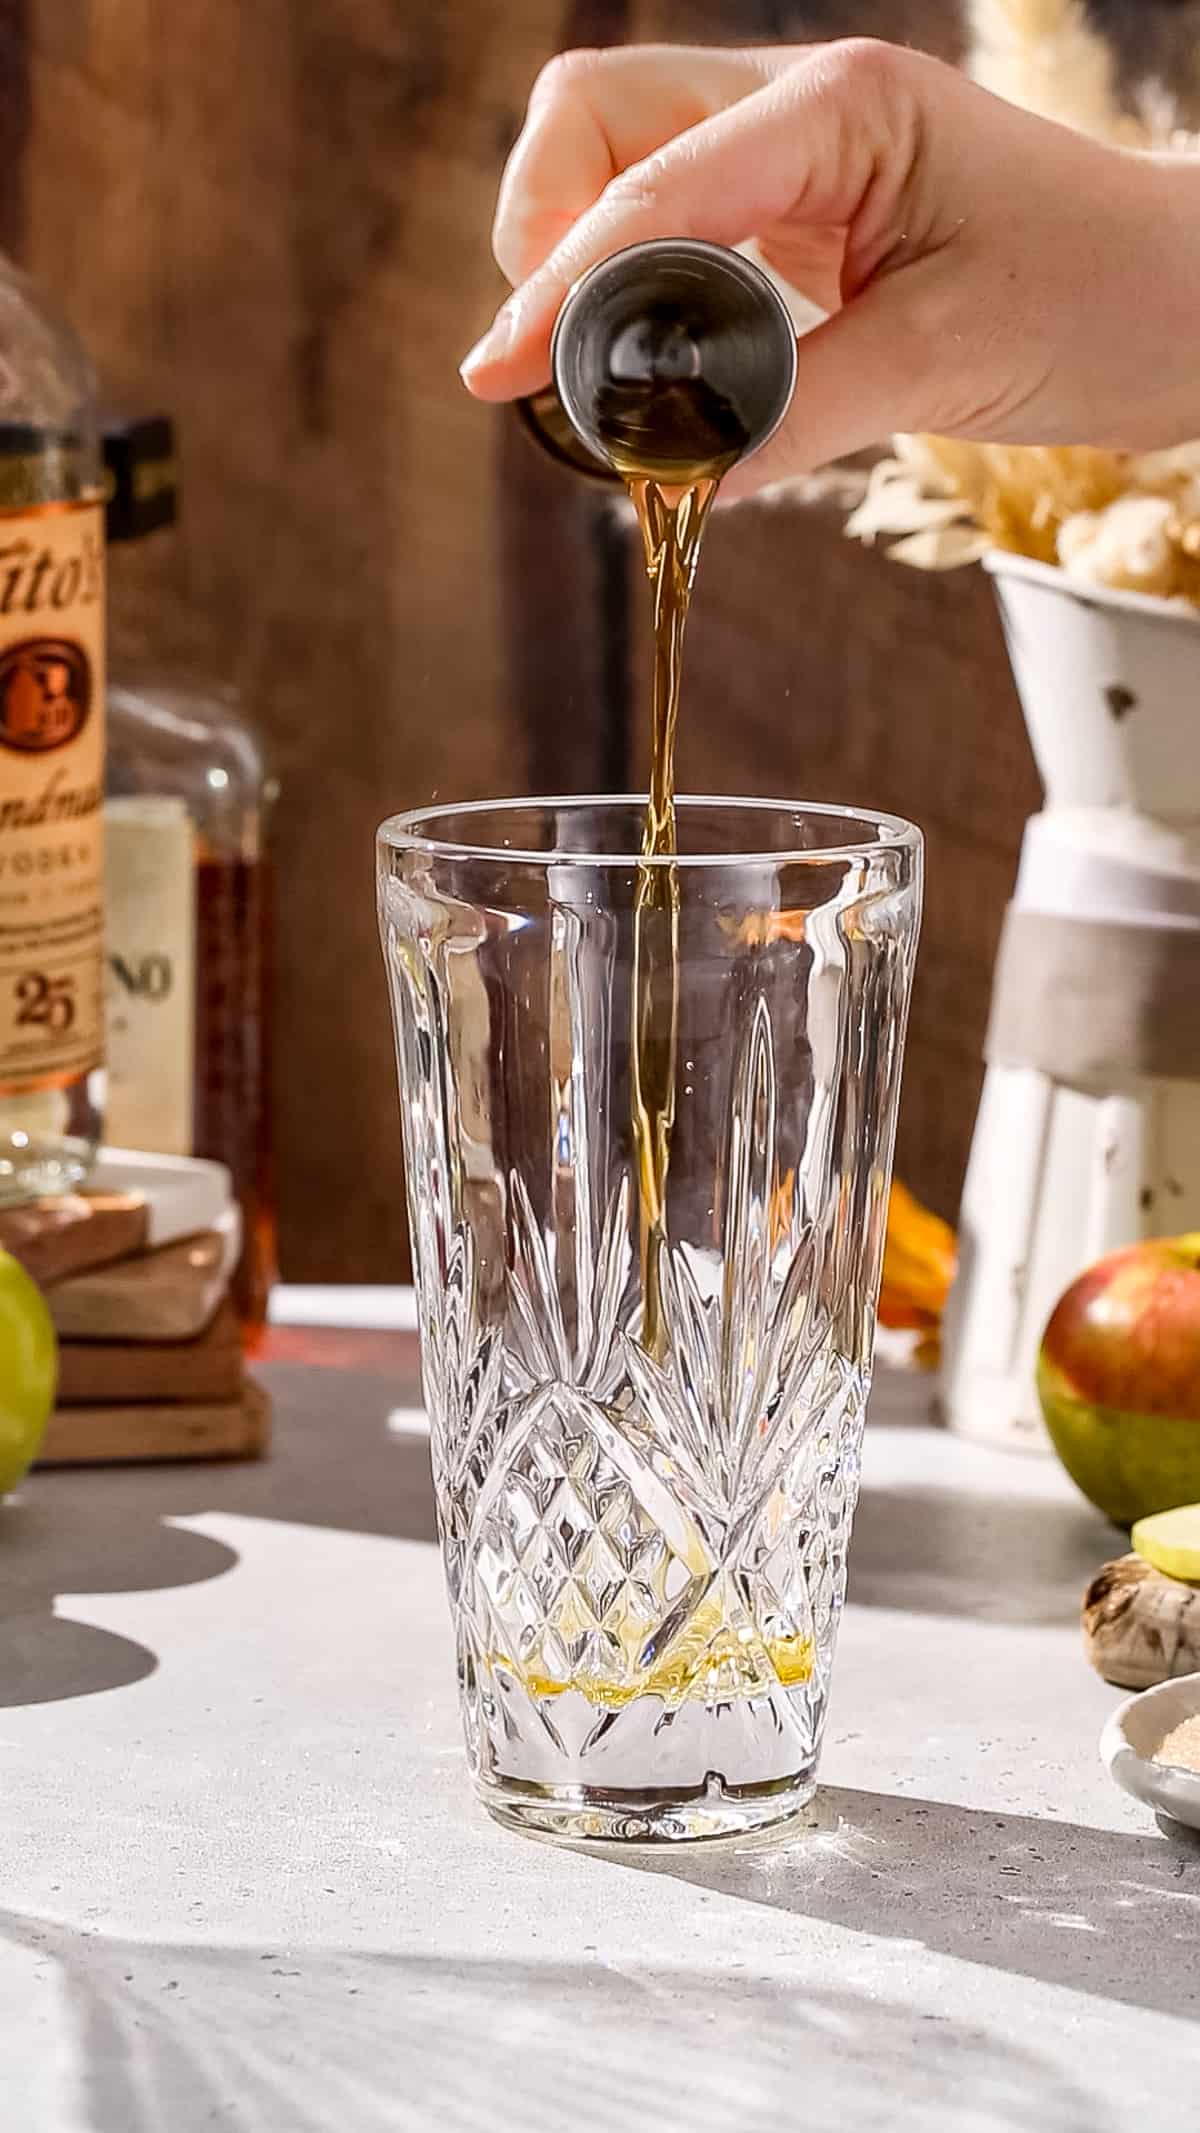 Hand pouring amaretto into a cocktail shaker.